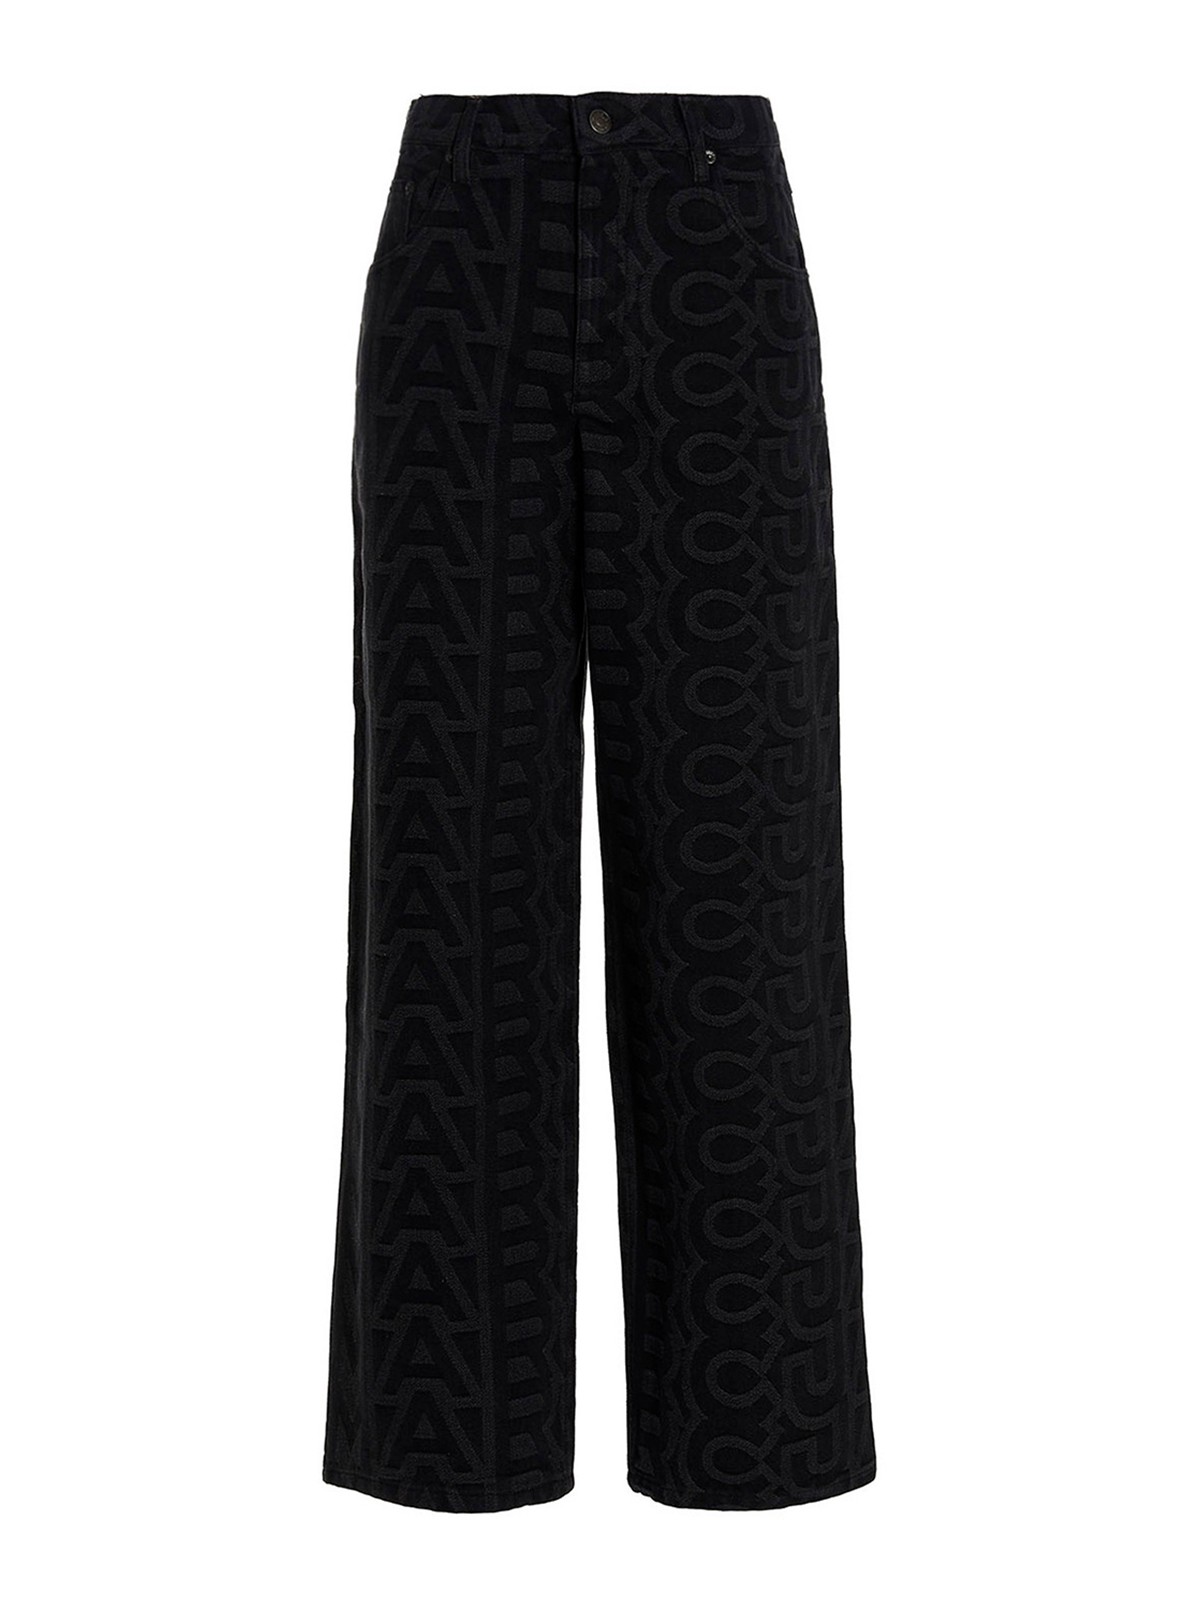 Black 'The Monogram' Jeans by Marc Jacobs on Sale